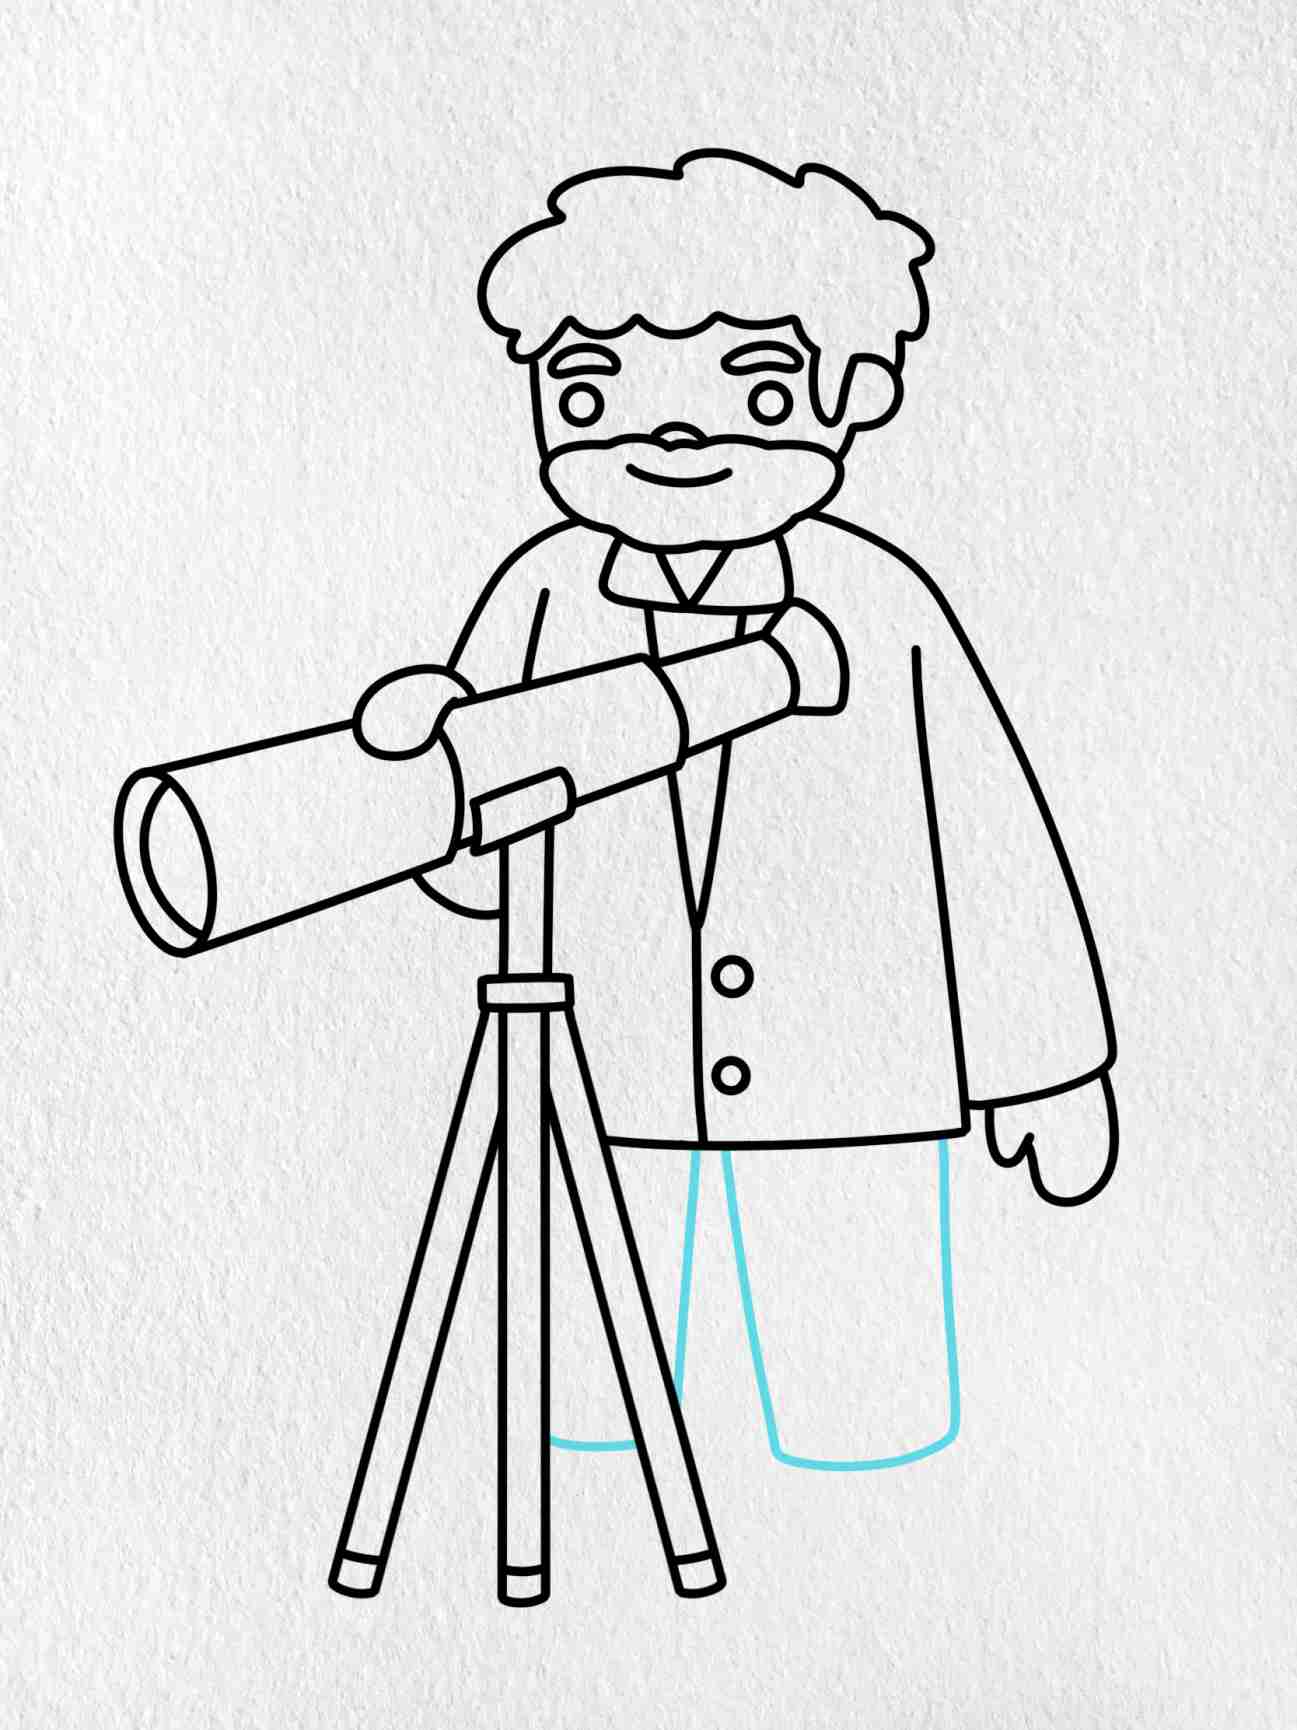 Astronomer drawing